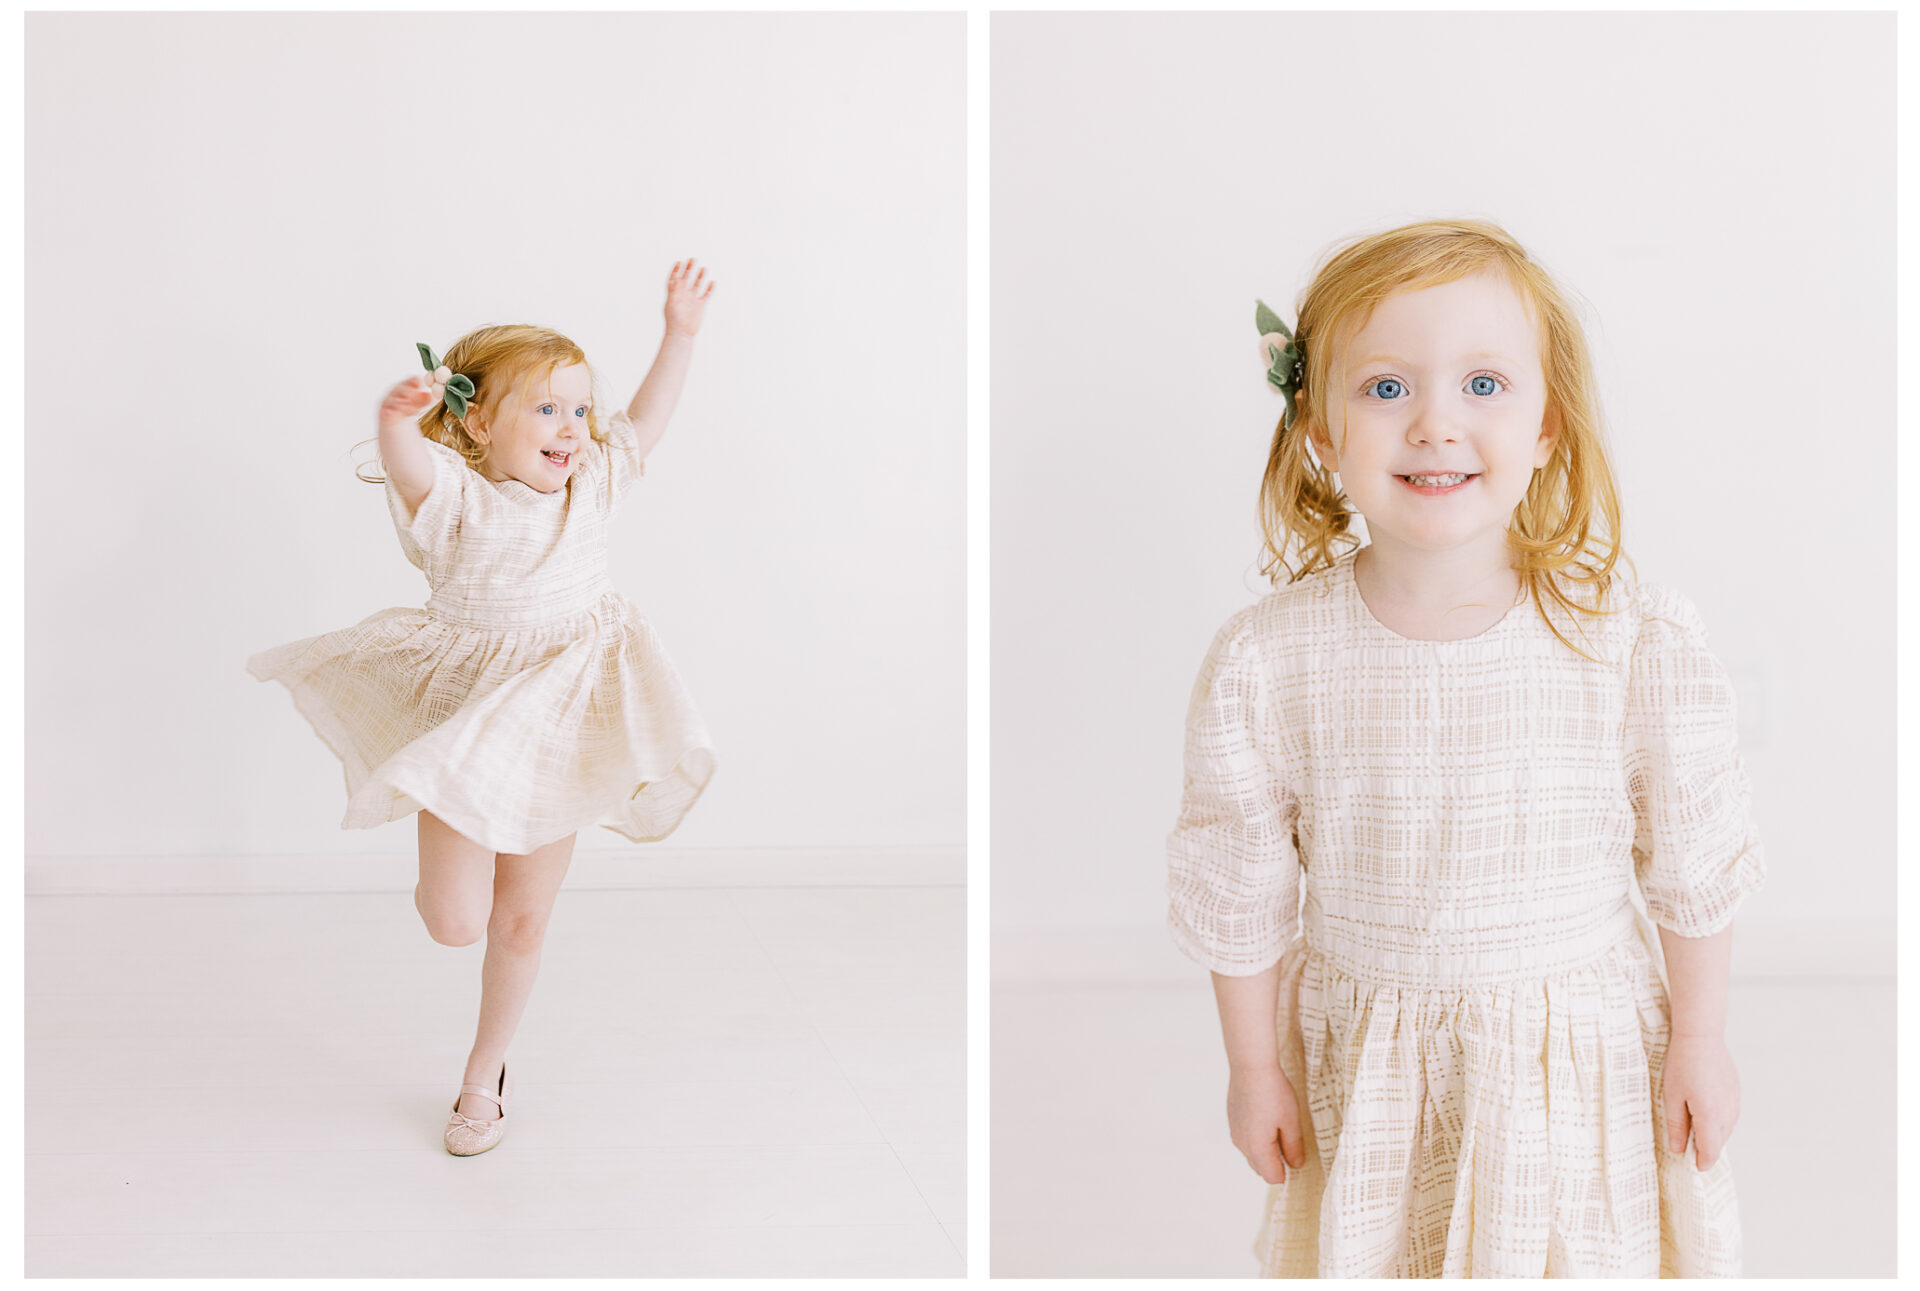 Big sister posing for a portrait at her baby sister's one year photography session